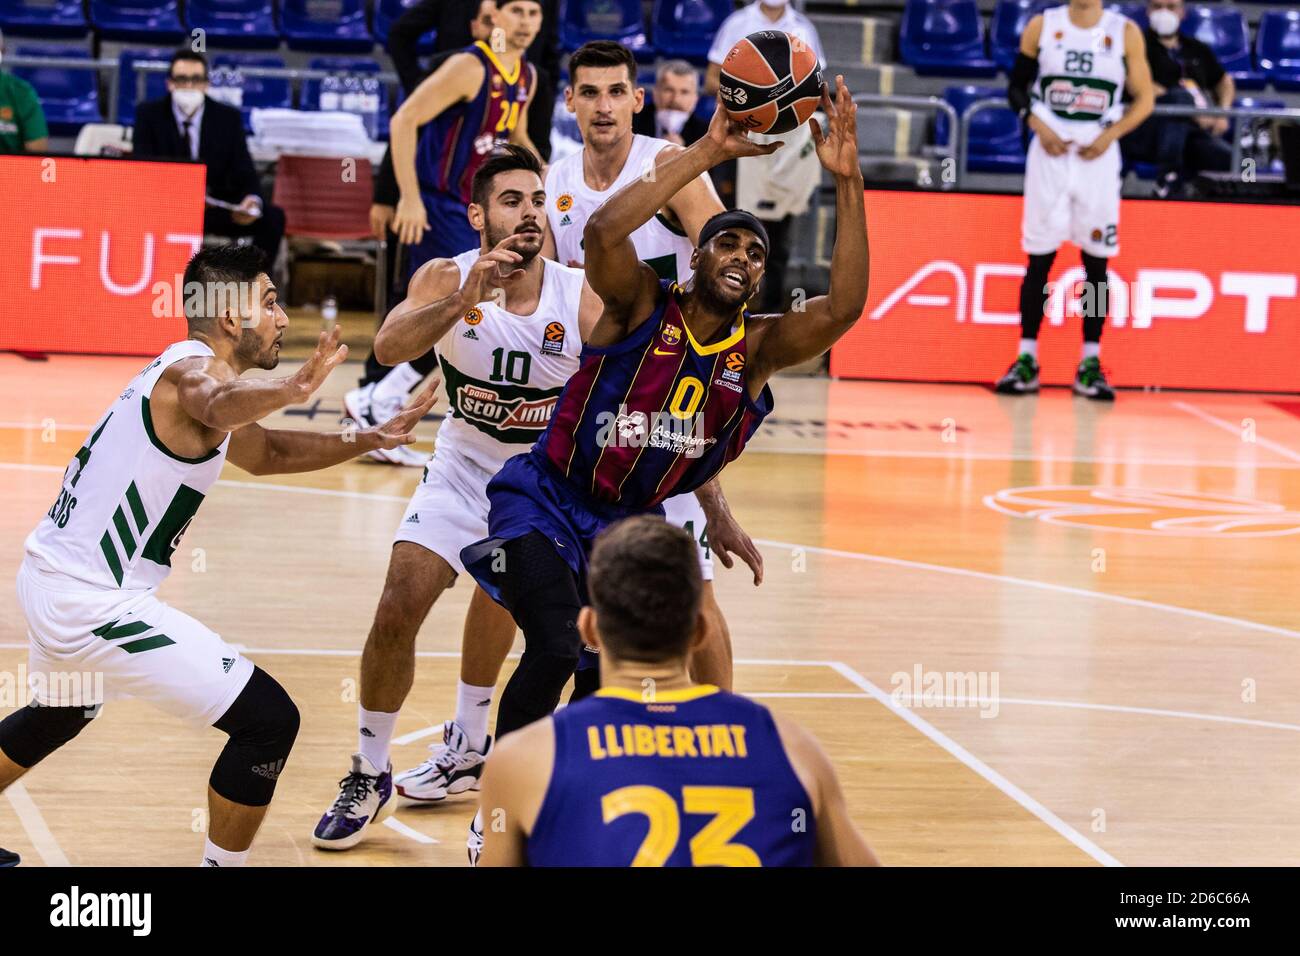 randon Davies of Fc Barcelona competes with Ioannis Papapetrou of Panathinaikos OPAP during the Turkish Airlines EuroLeague basketball match between Stock Photo